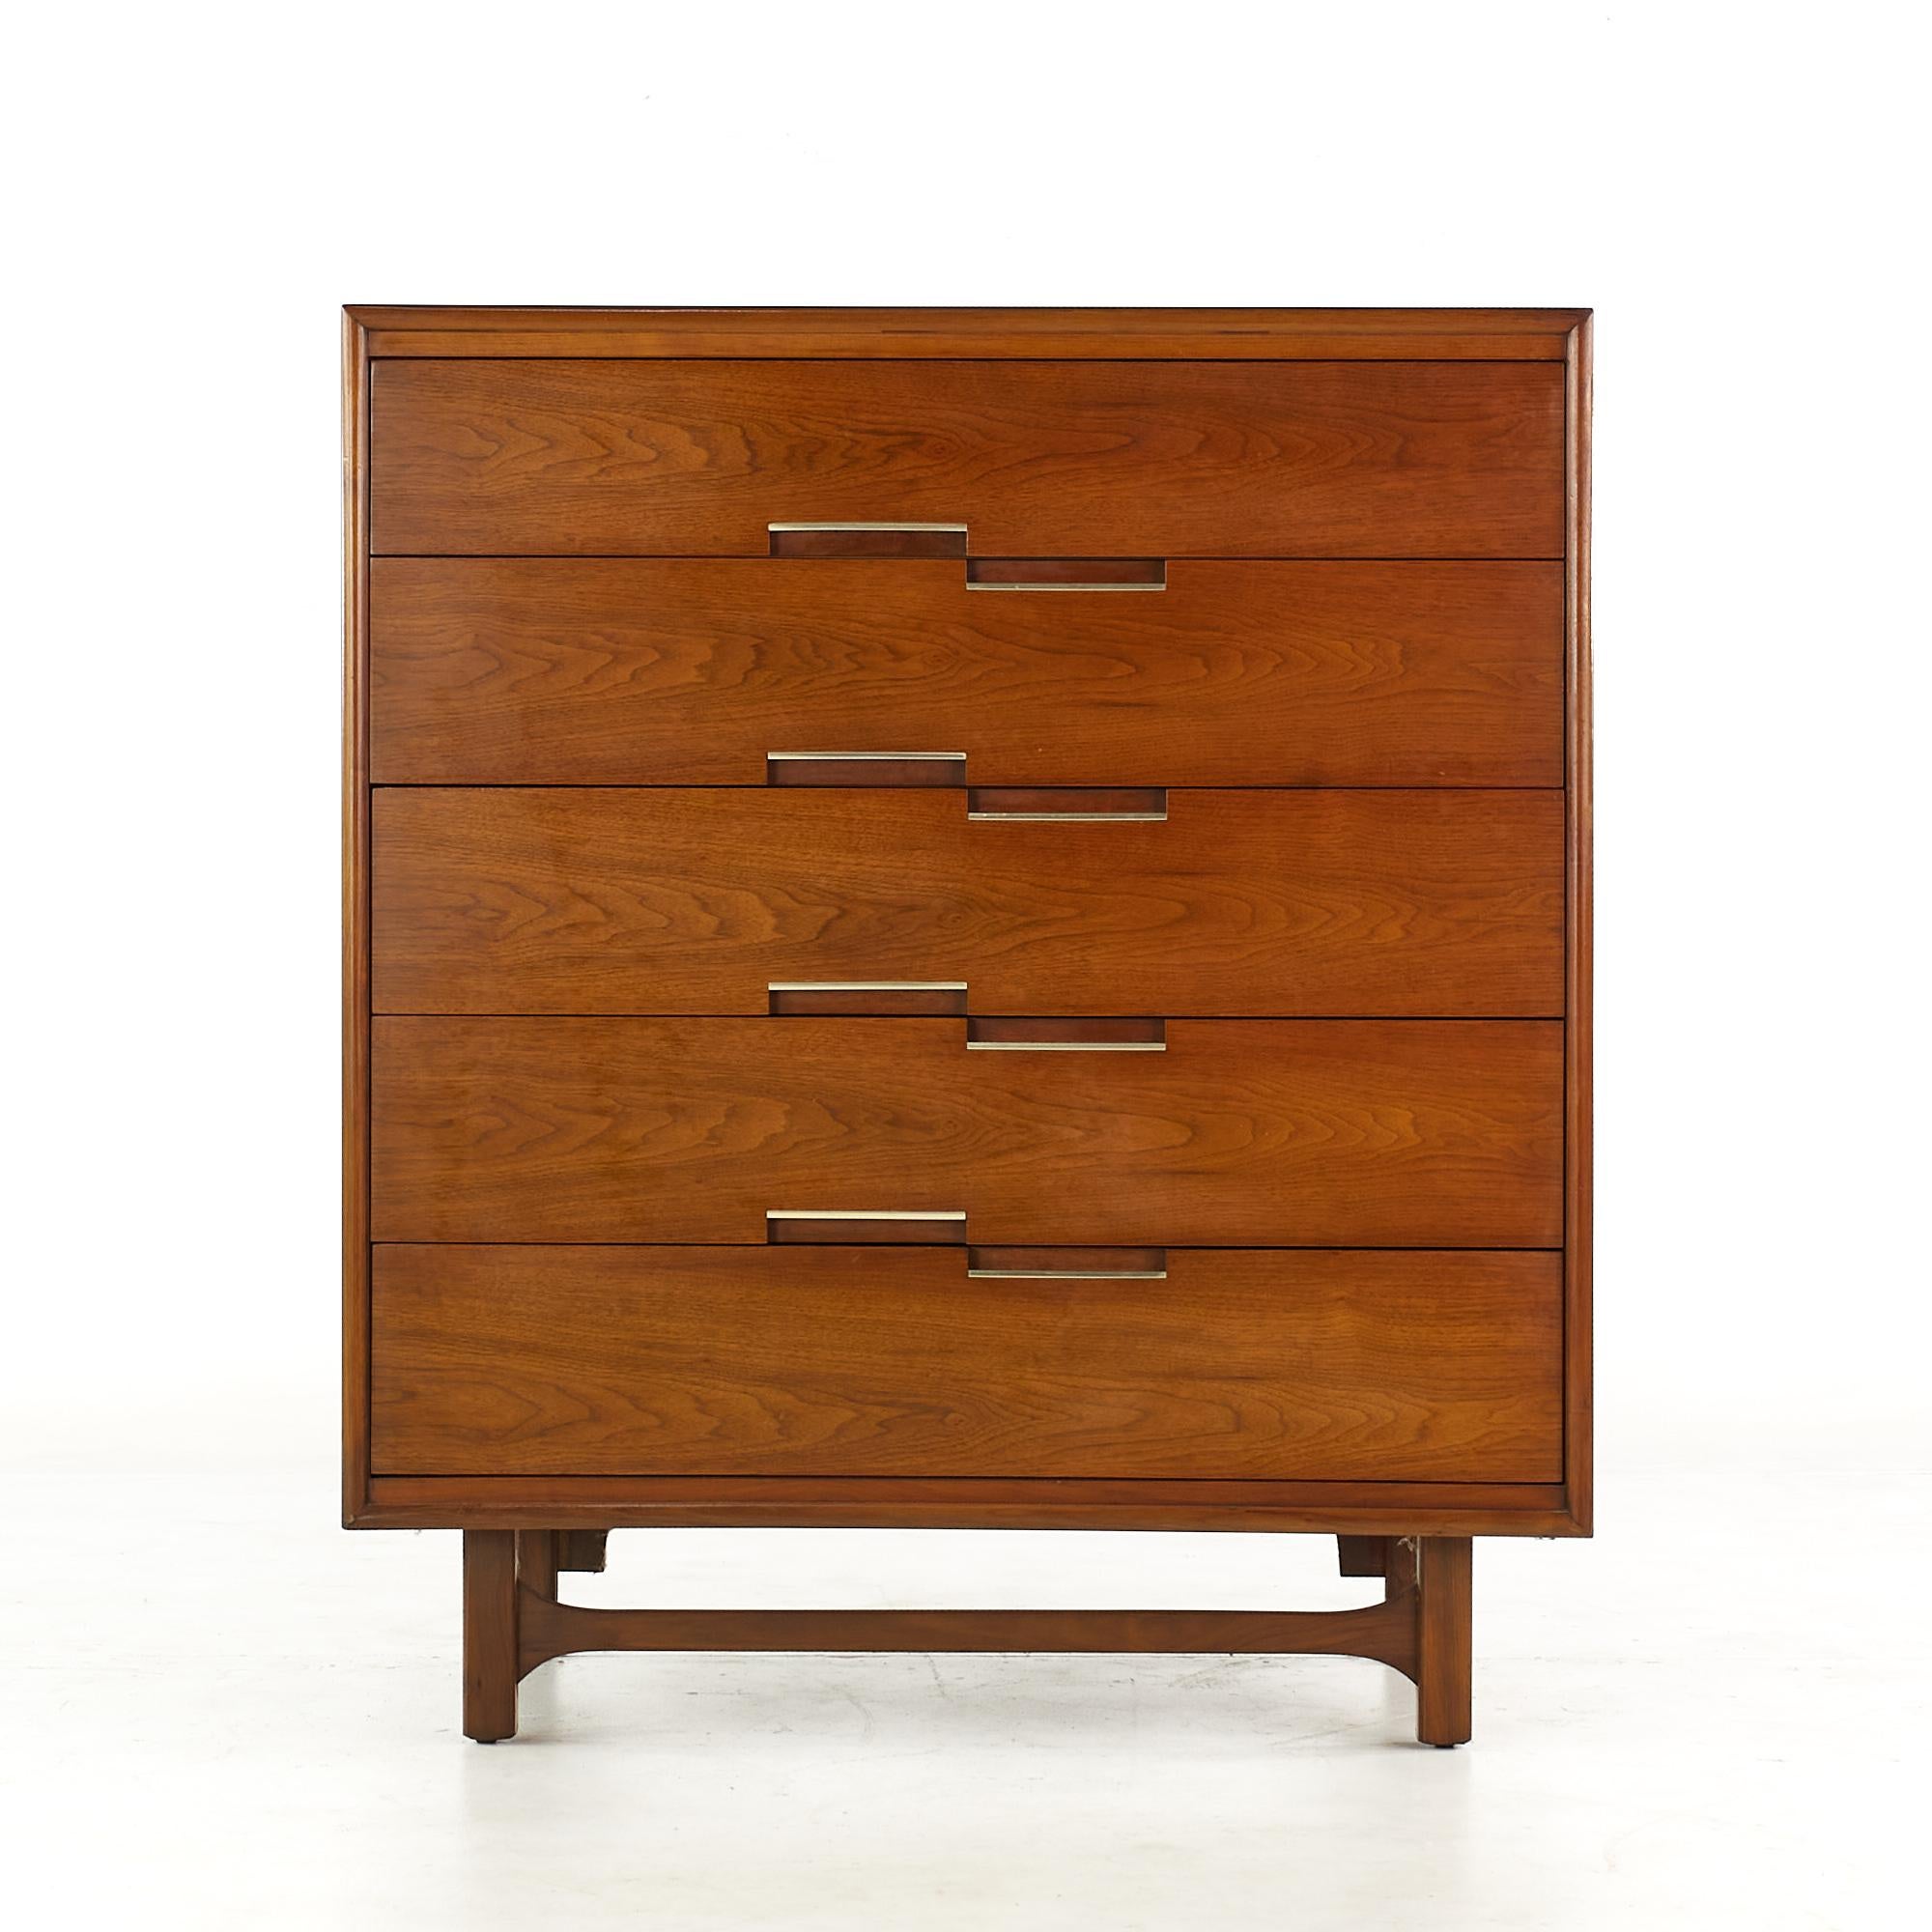 Cavalier furniture mid century walnut and brass highboy dresser.

This highboy dresser measures: 38 wide x 21 deep x 44.25 inches high.

All pieces of furniture can be had in what we call restored vintage condition. That means the piece is